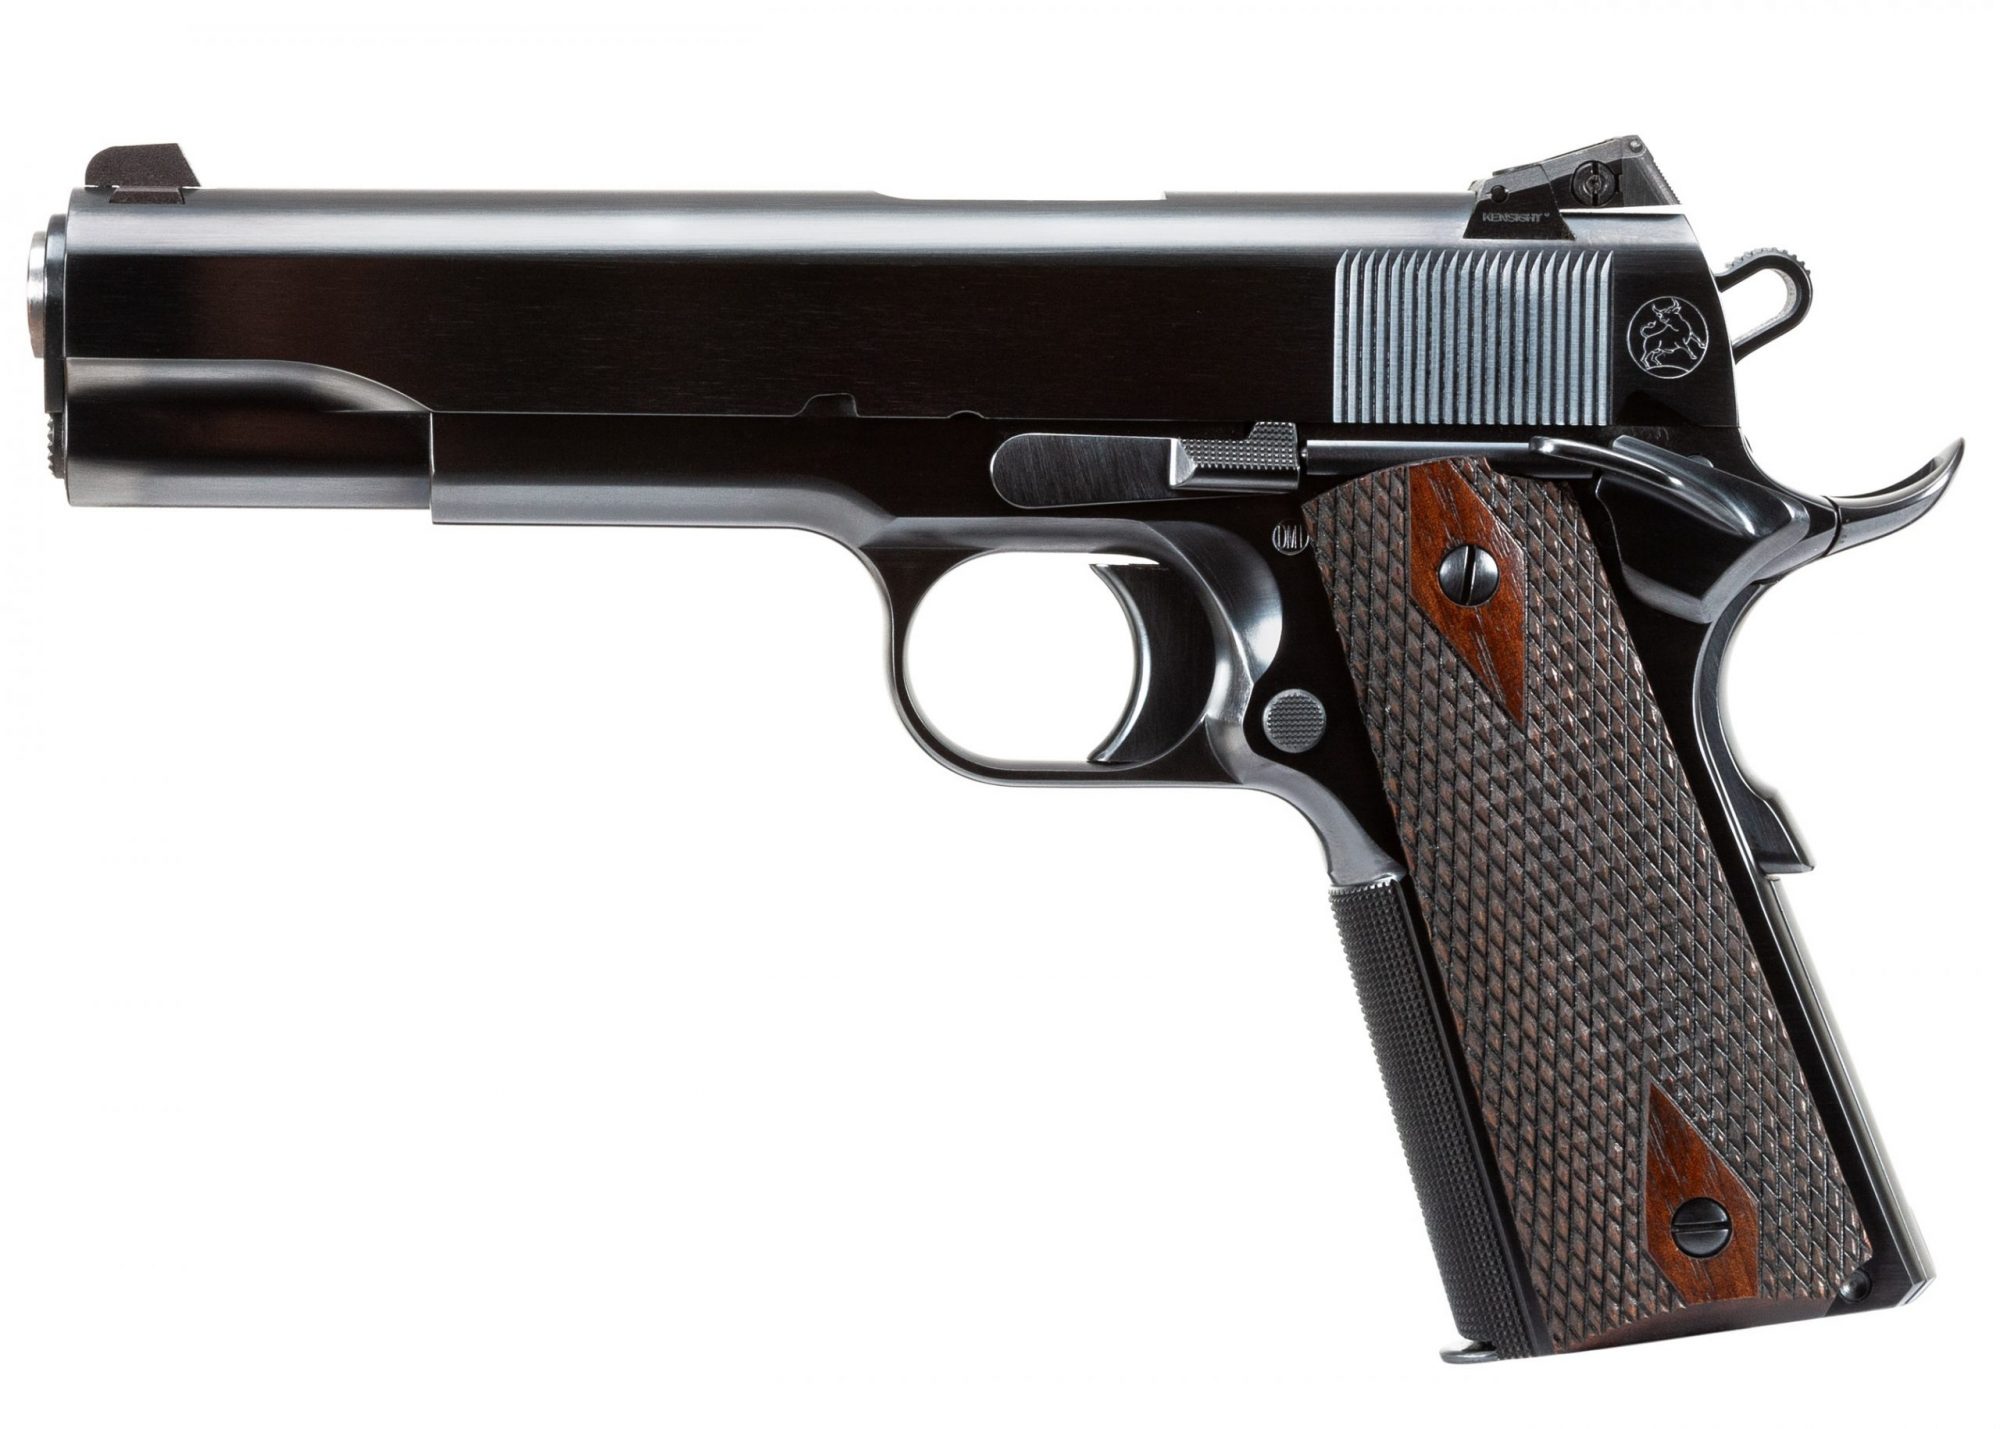 Photo of a Turnbull Model 1911 Government, featuring period-correct charcoal bluing